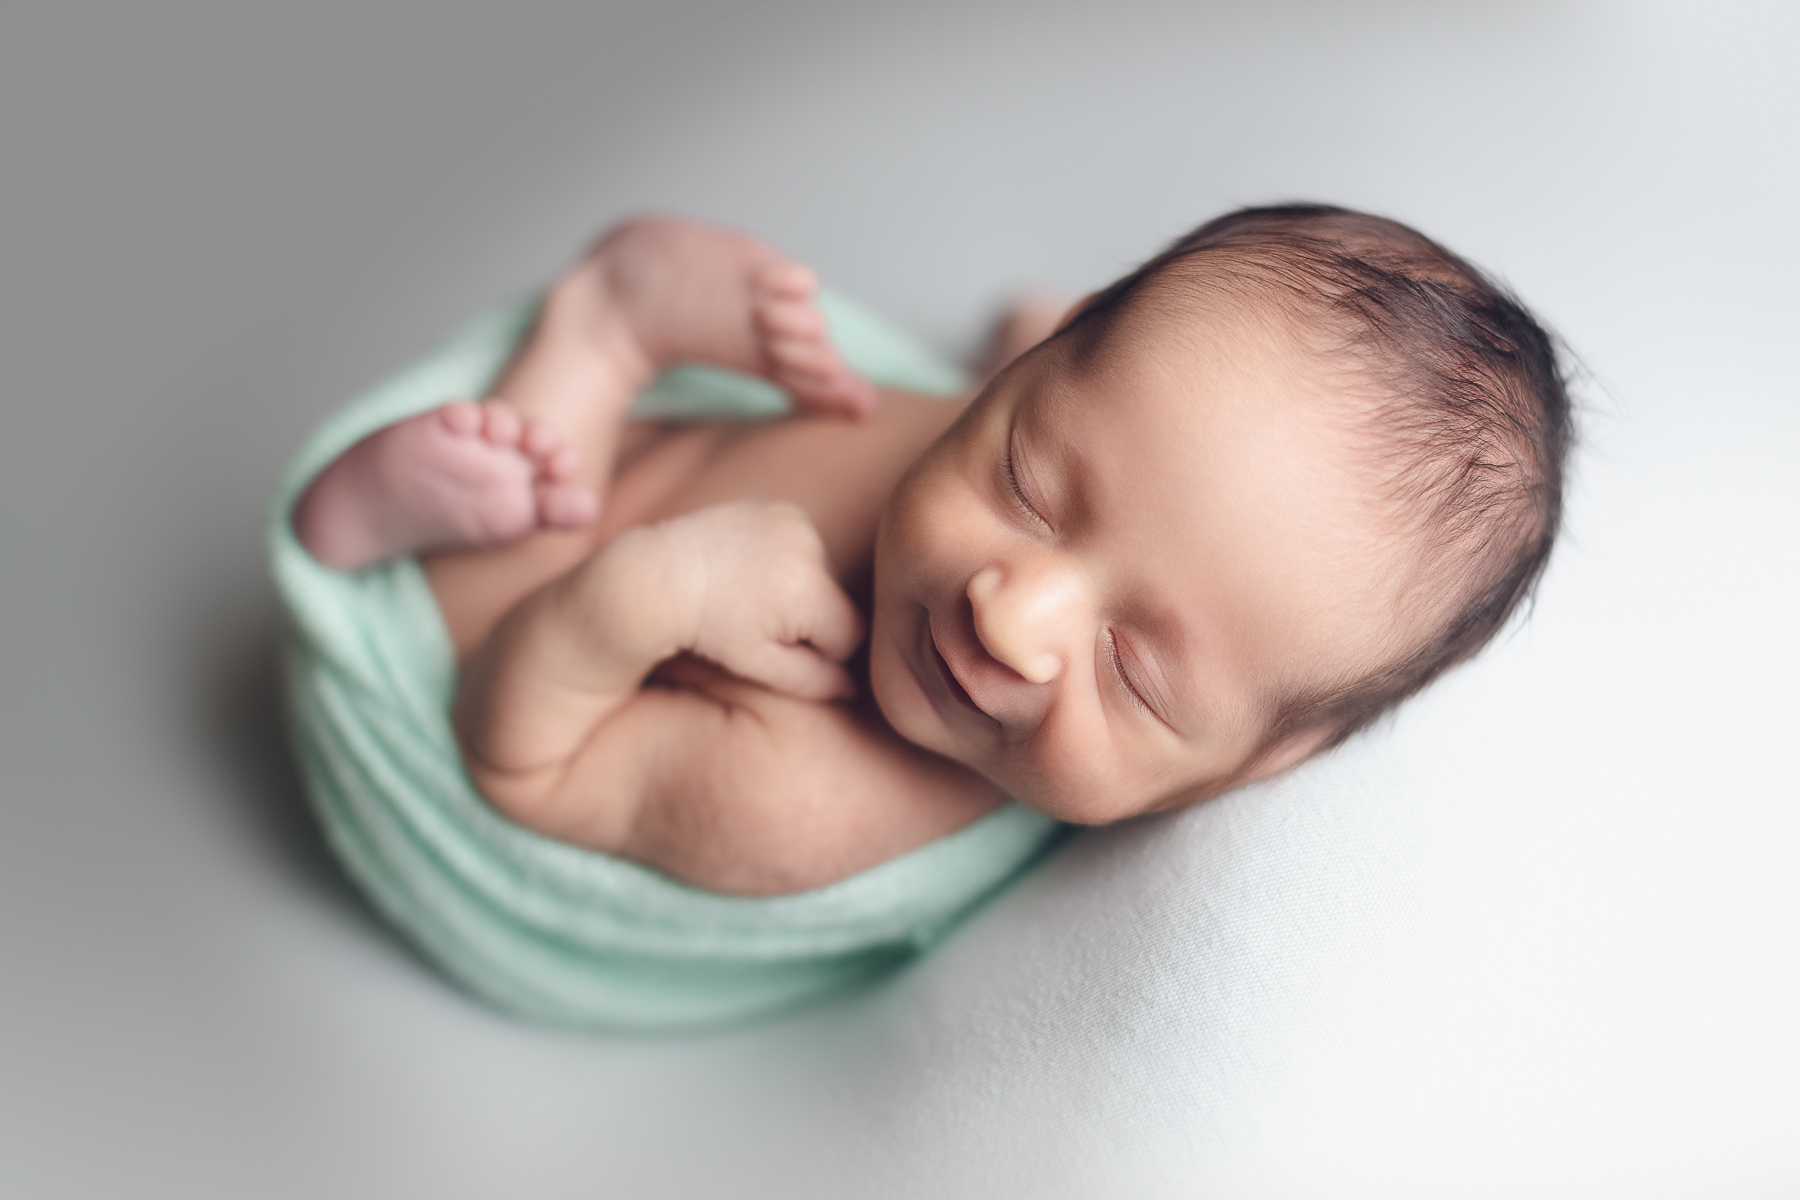 Newborn baby only photography package on sale - baby boy smiling on a green background